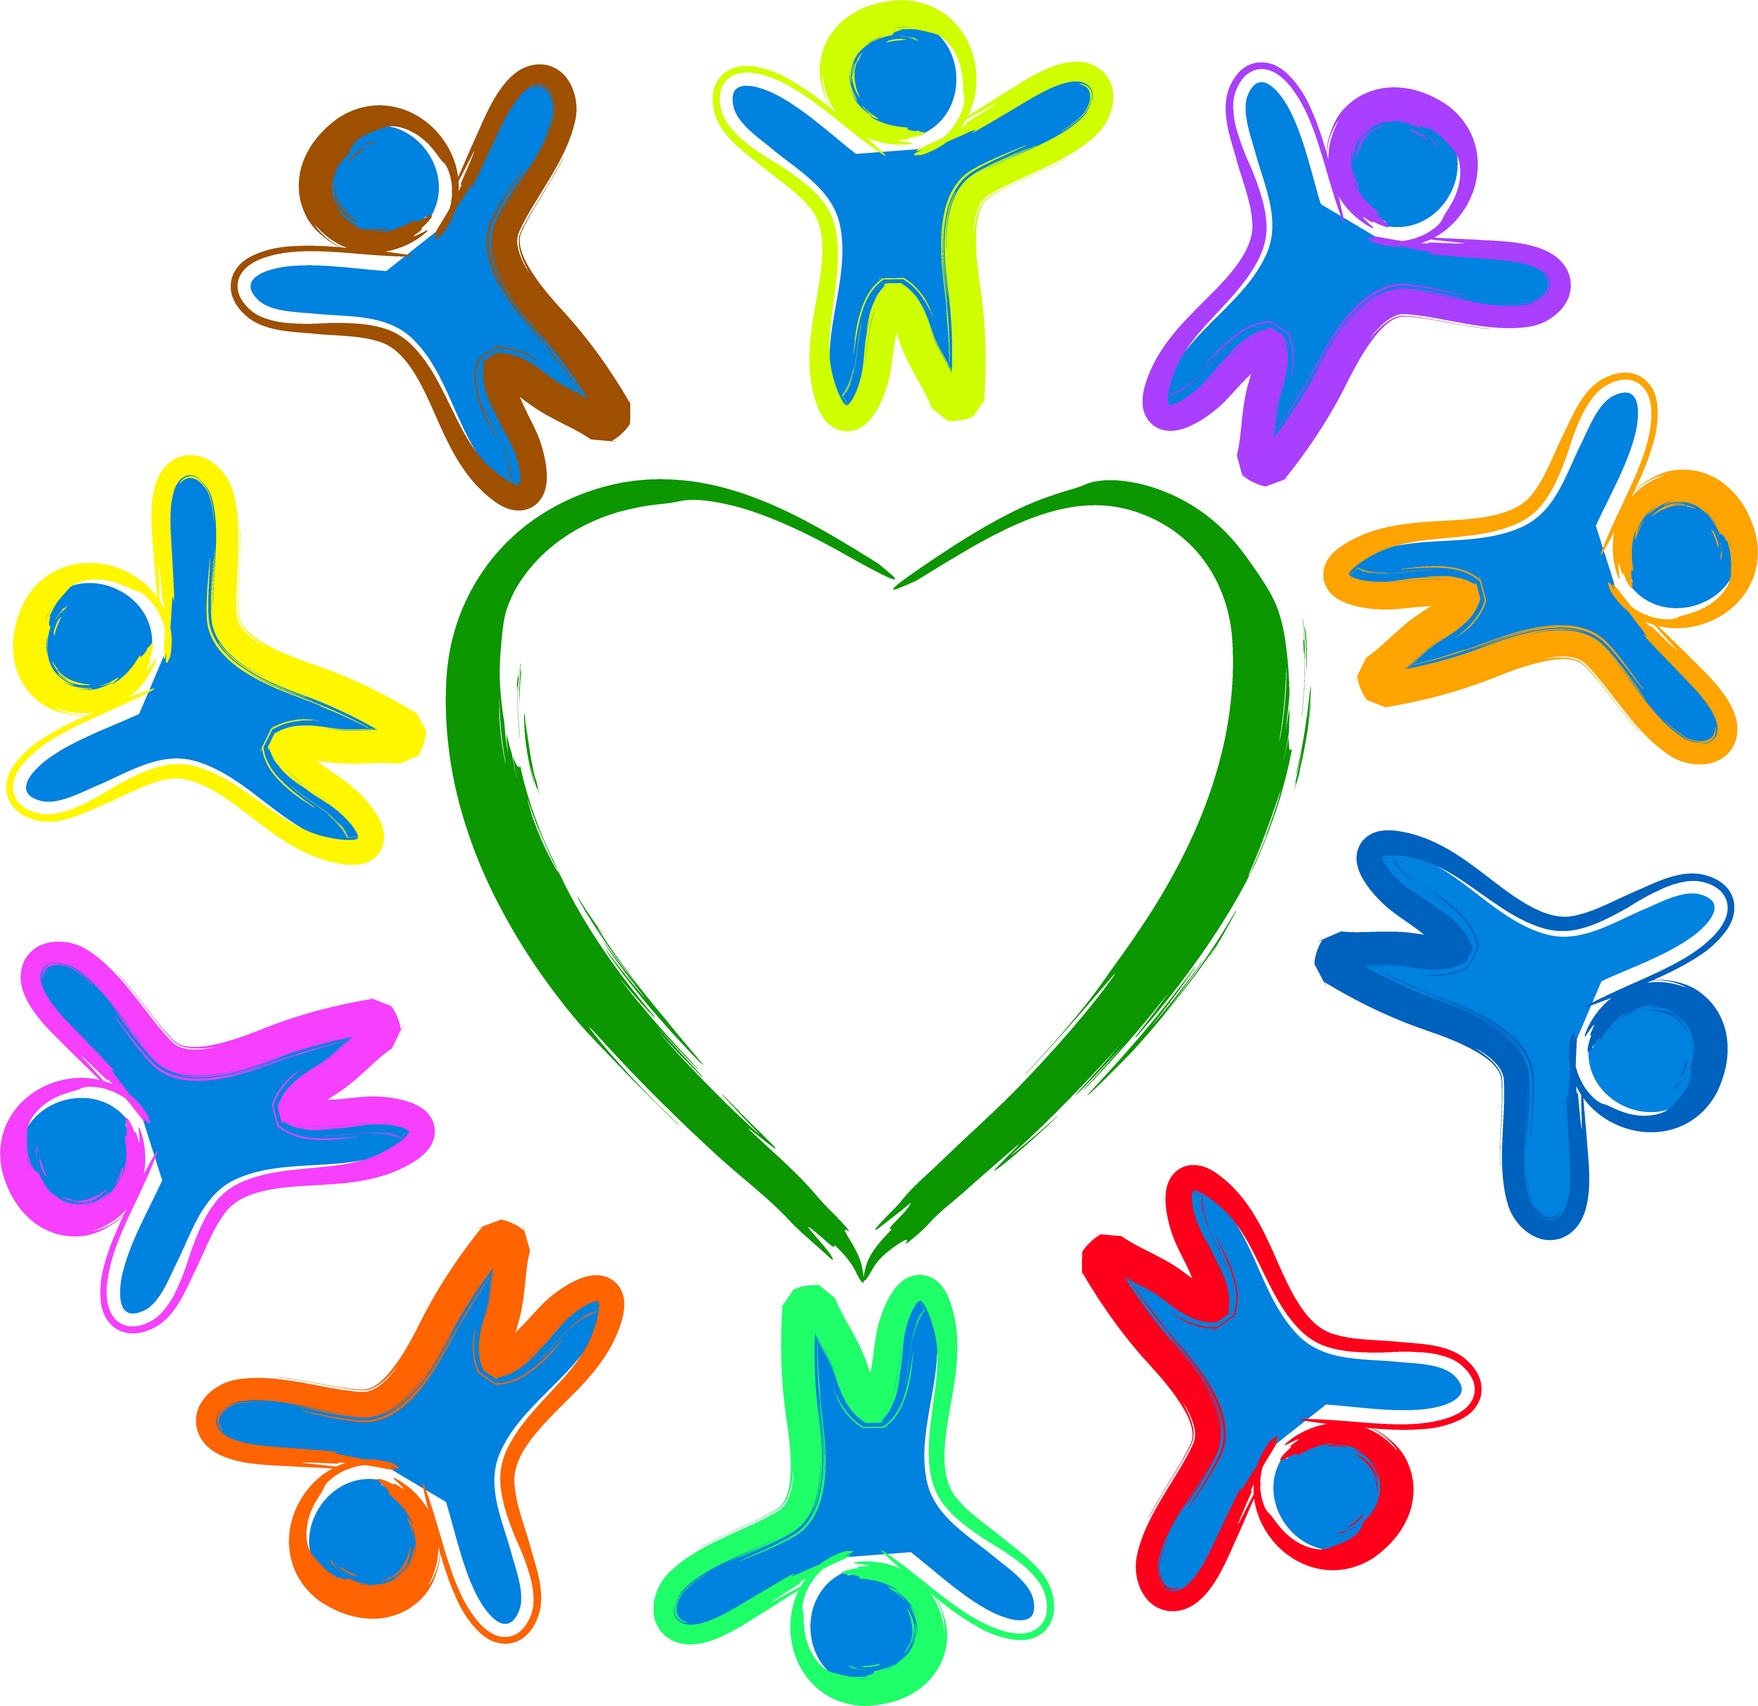 Helping People - ClipArt Best